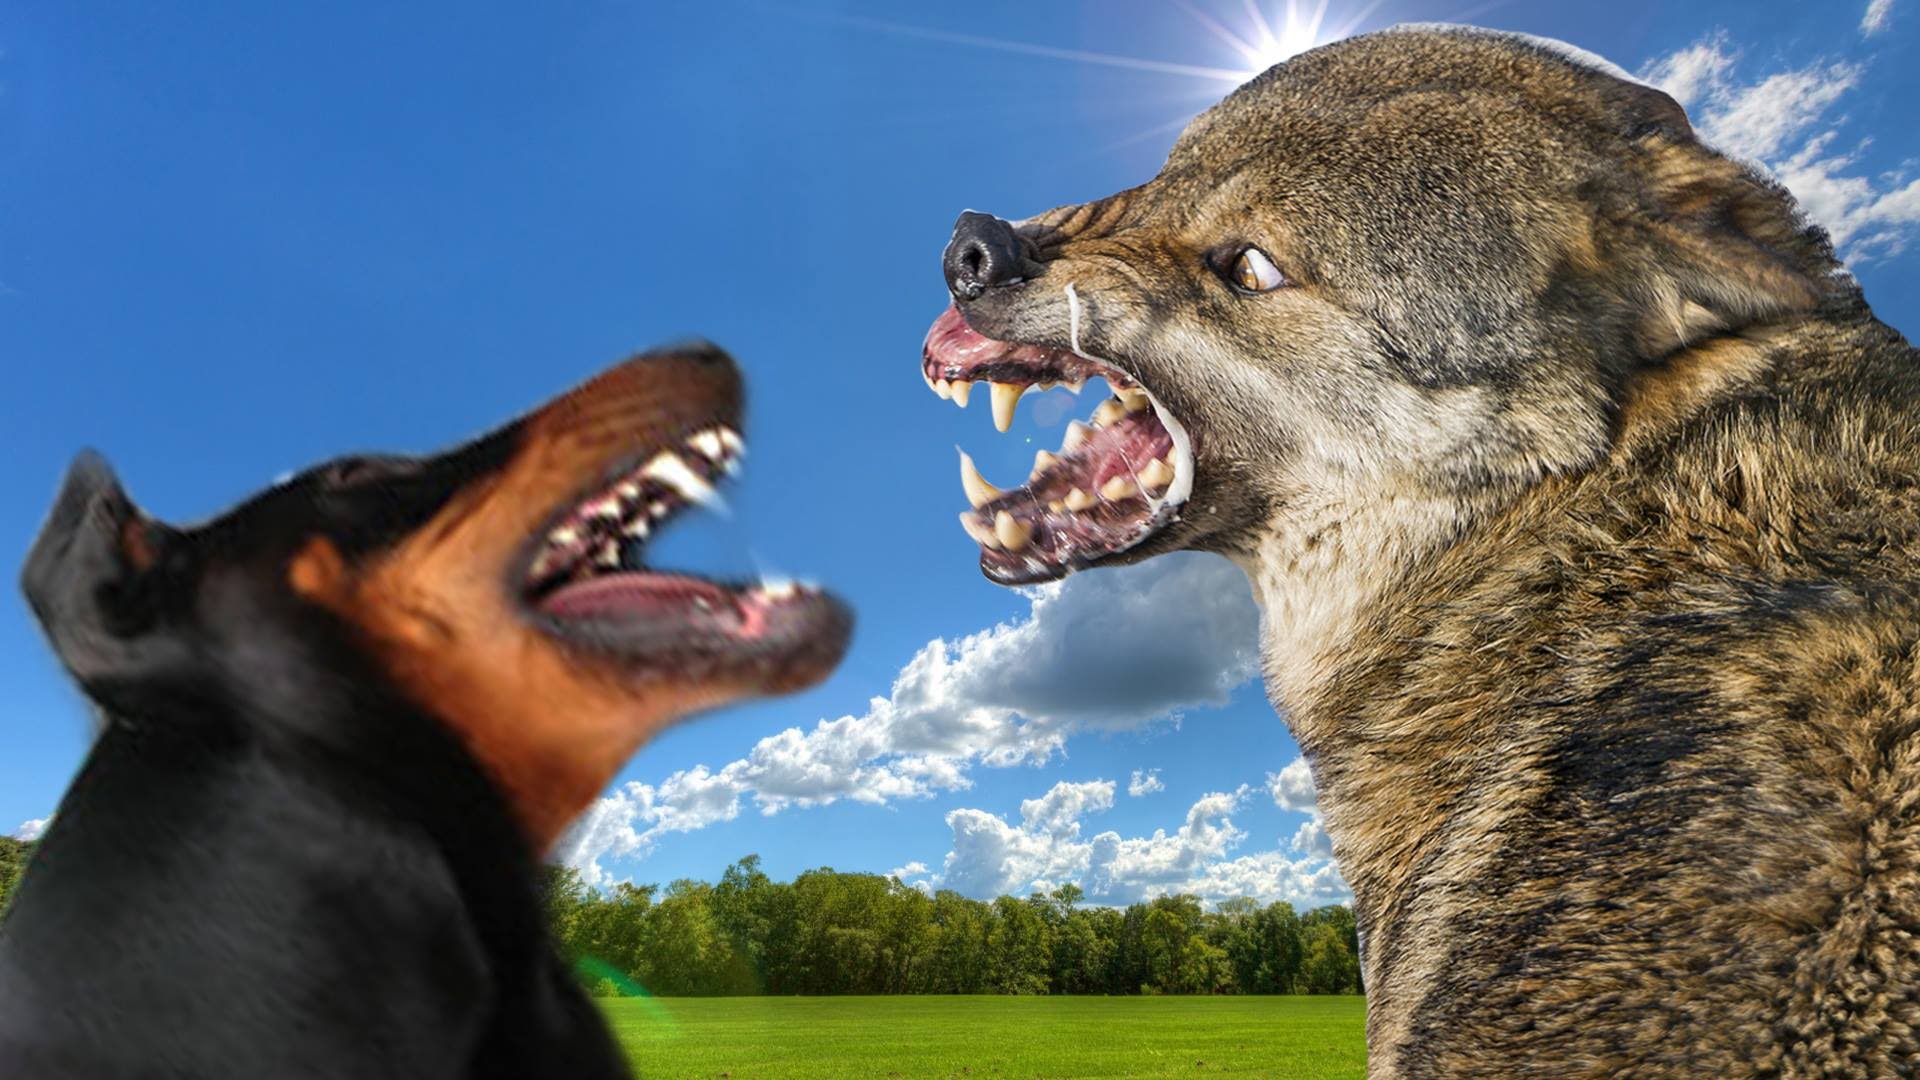 Doberman vs Wild Wolf - Who would win in a Fight? - YouTube